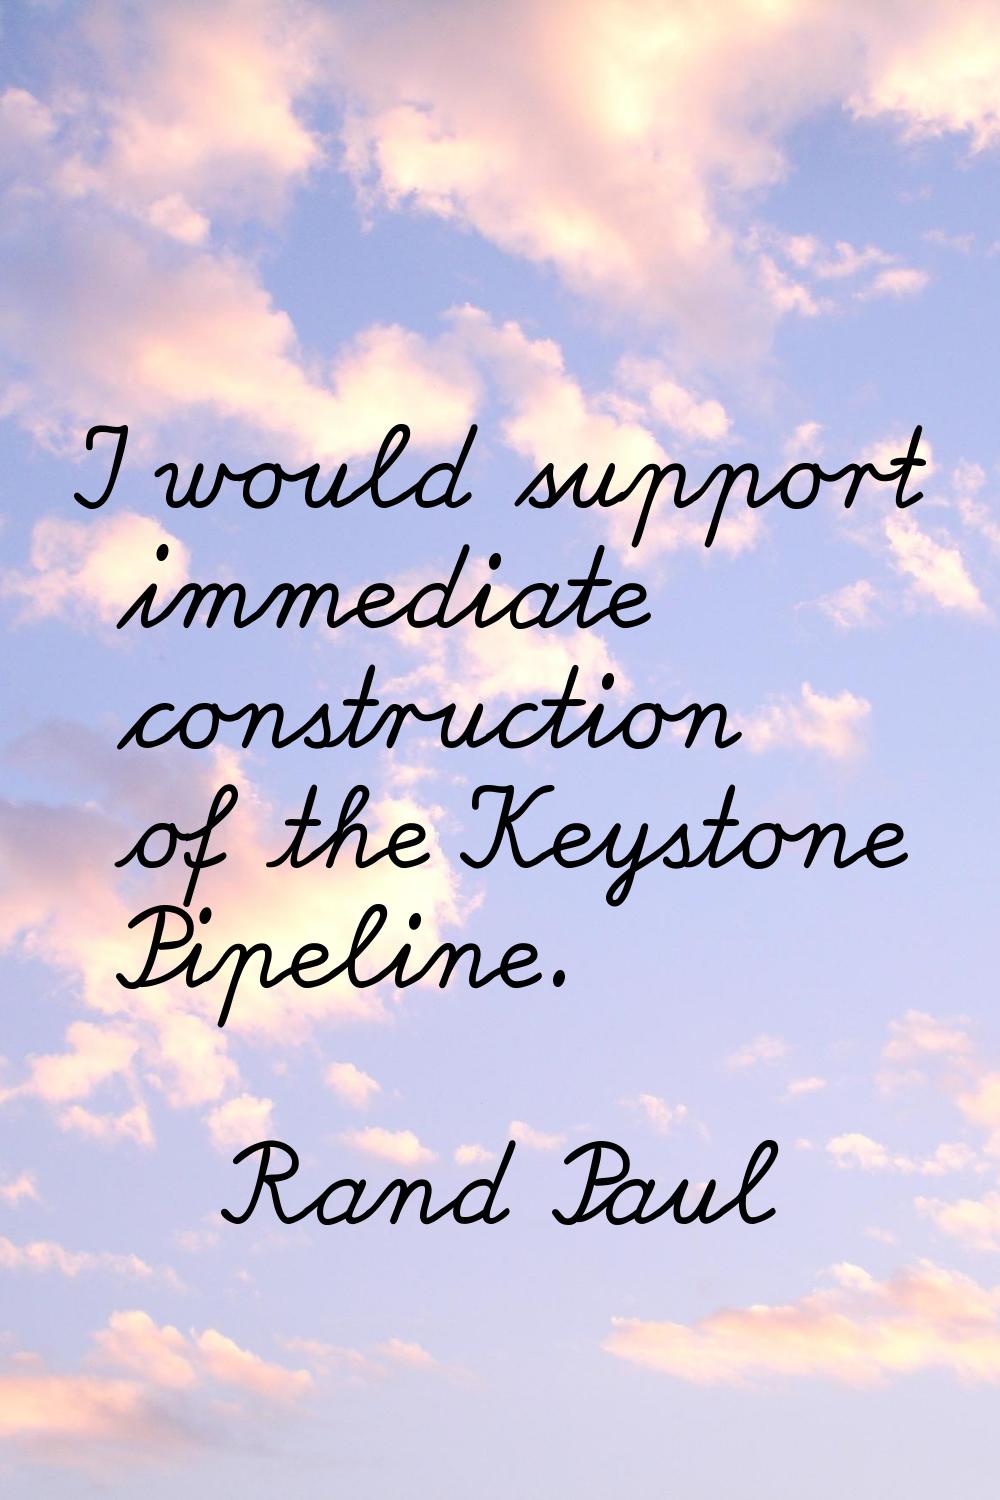 I would support immediate construction of the Keystone Pipeline.